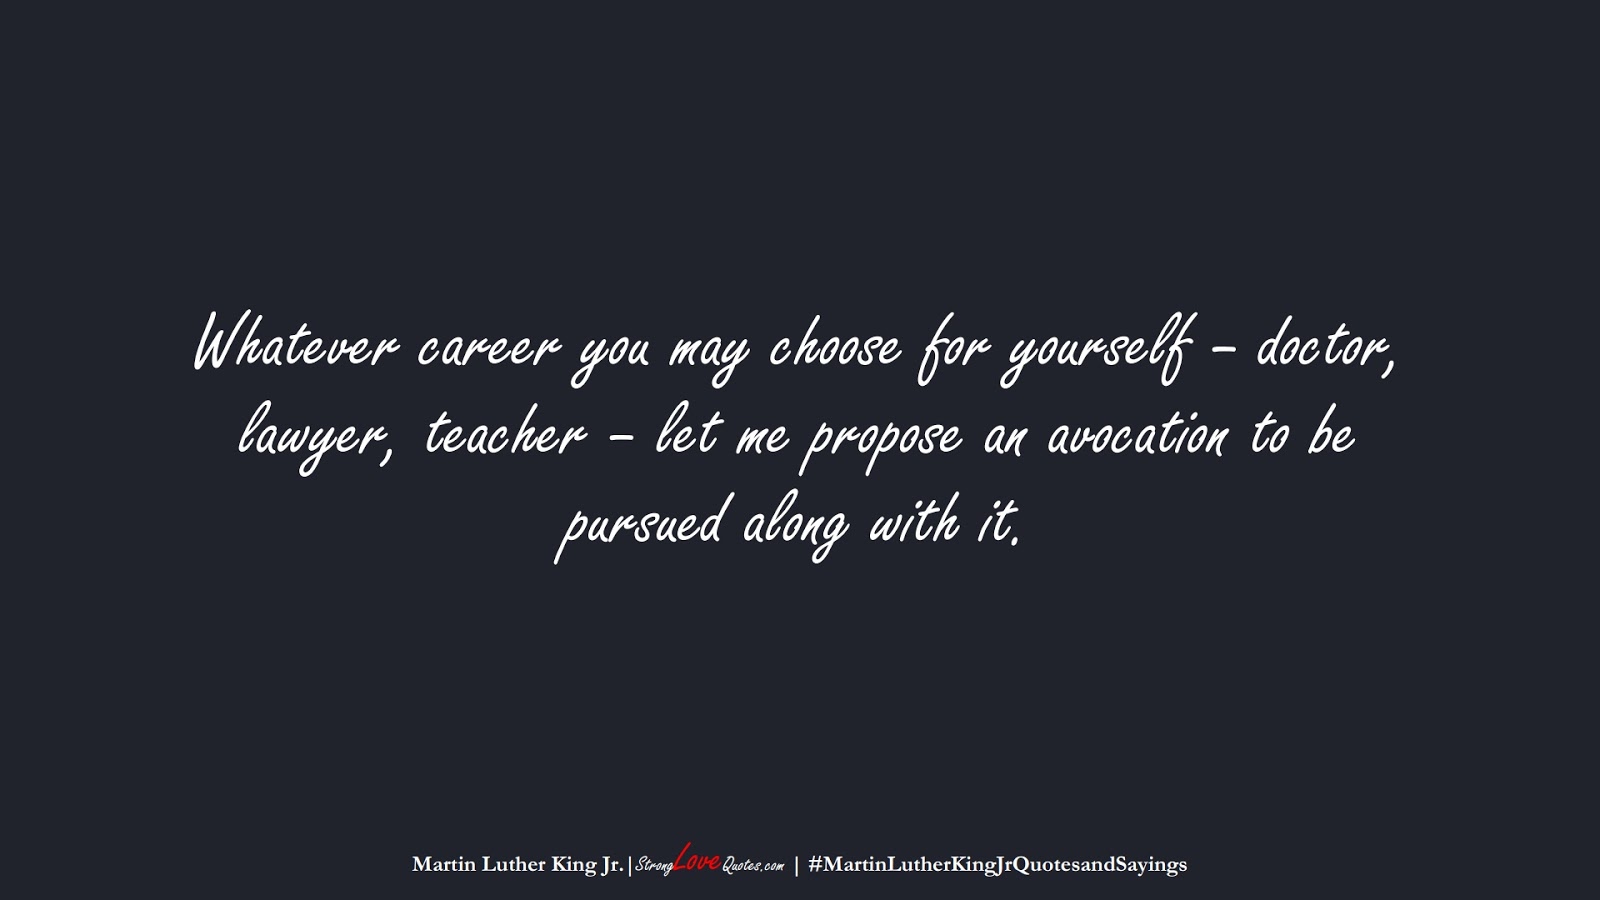 Whatever career you may choose for yourself – doctor, lawyer, teacher – let me propose an avocation to be pursued along with it. (Martin Luther King Jr.);  #MartinLutherKingJrQuotesandSayings